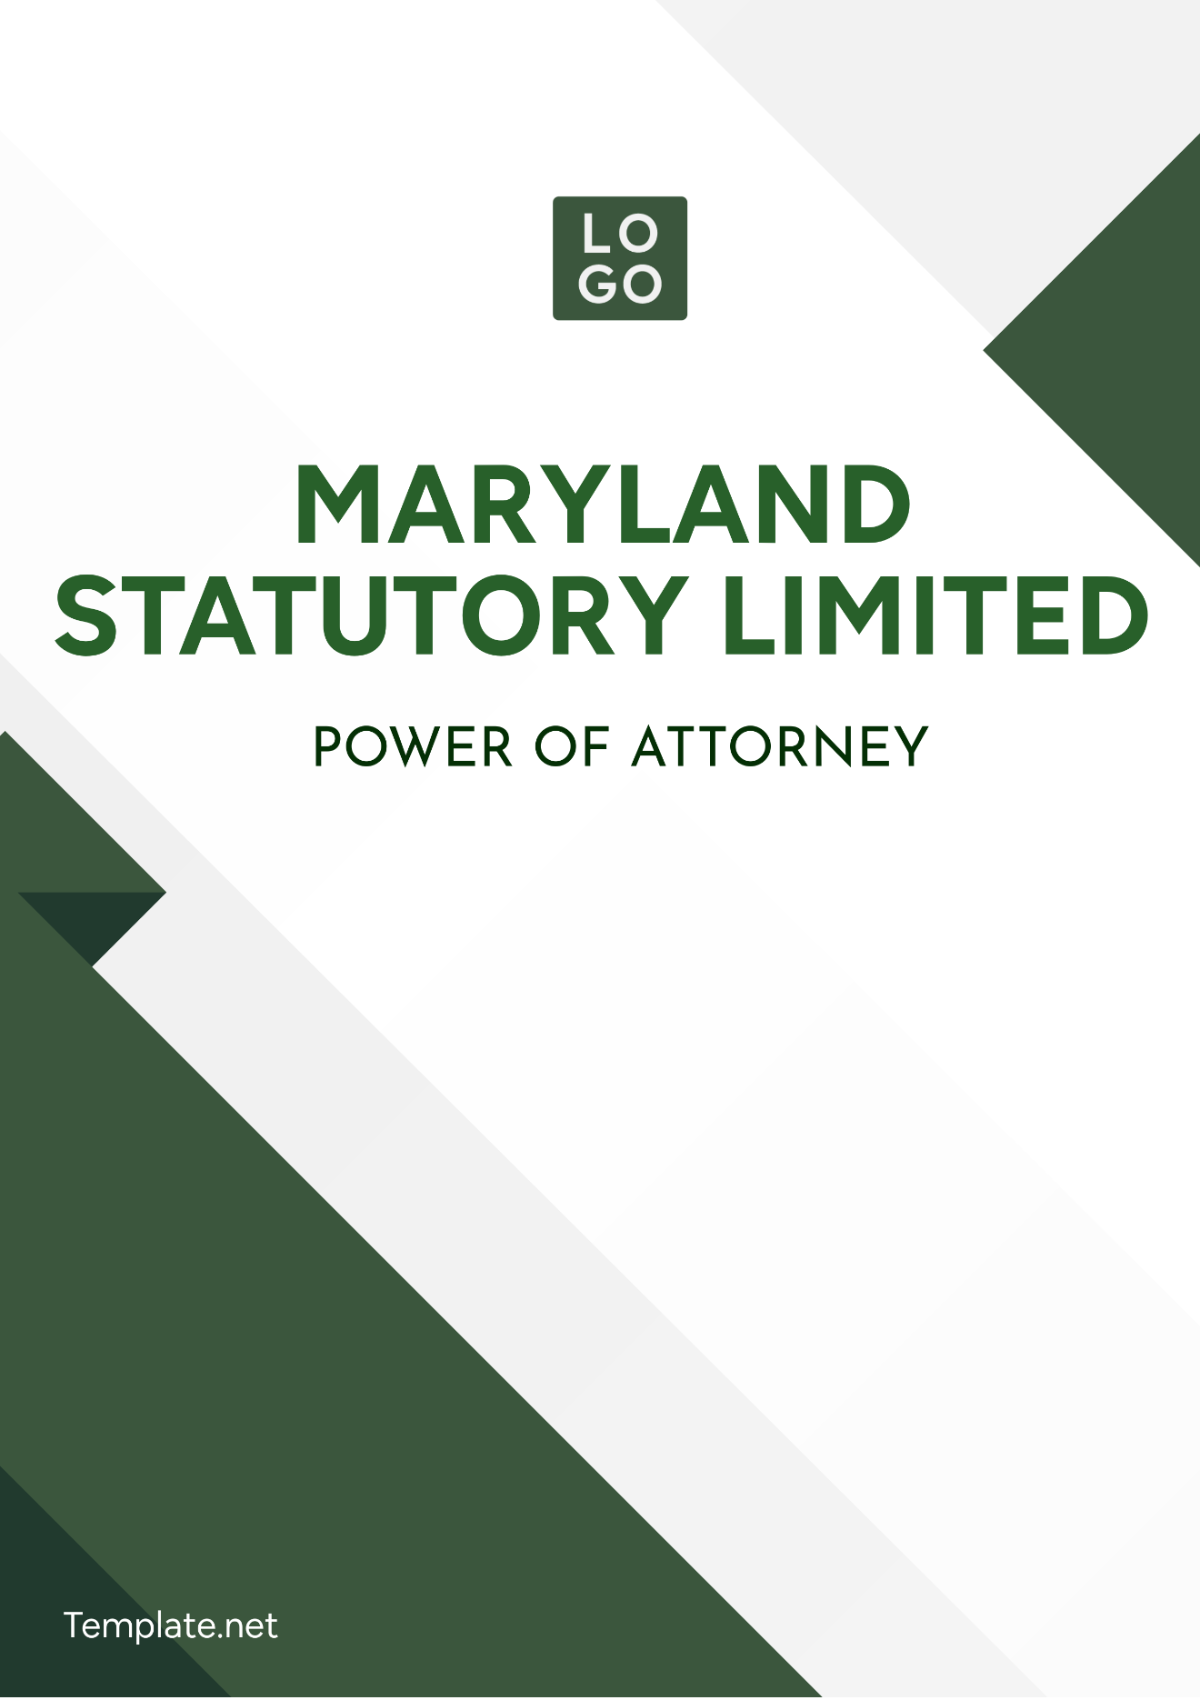 Free Maryland Statutory Limited Power of Attorney Template